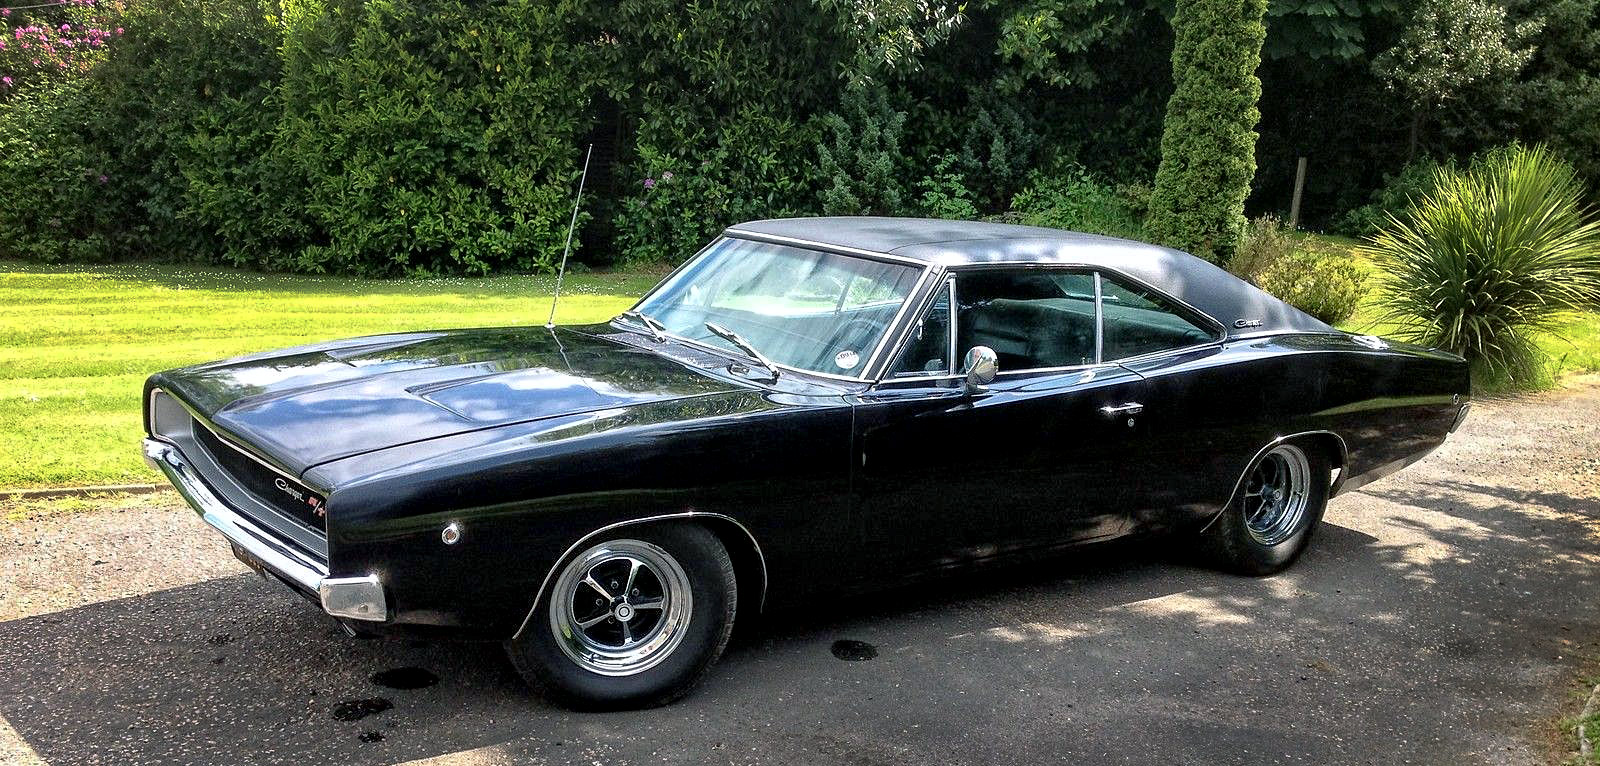 1968 DODGE CHARGER 440 RT4